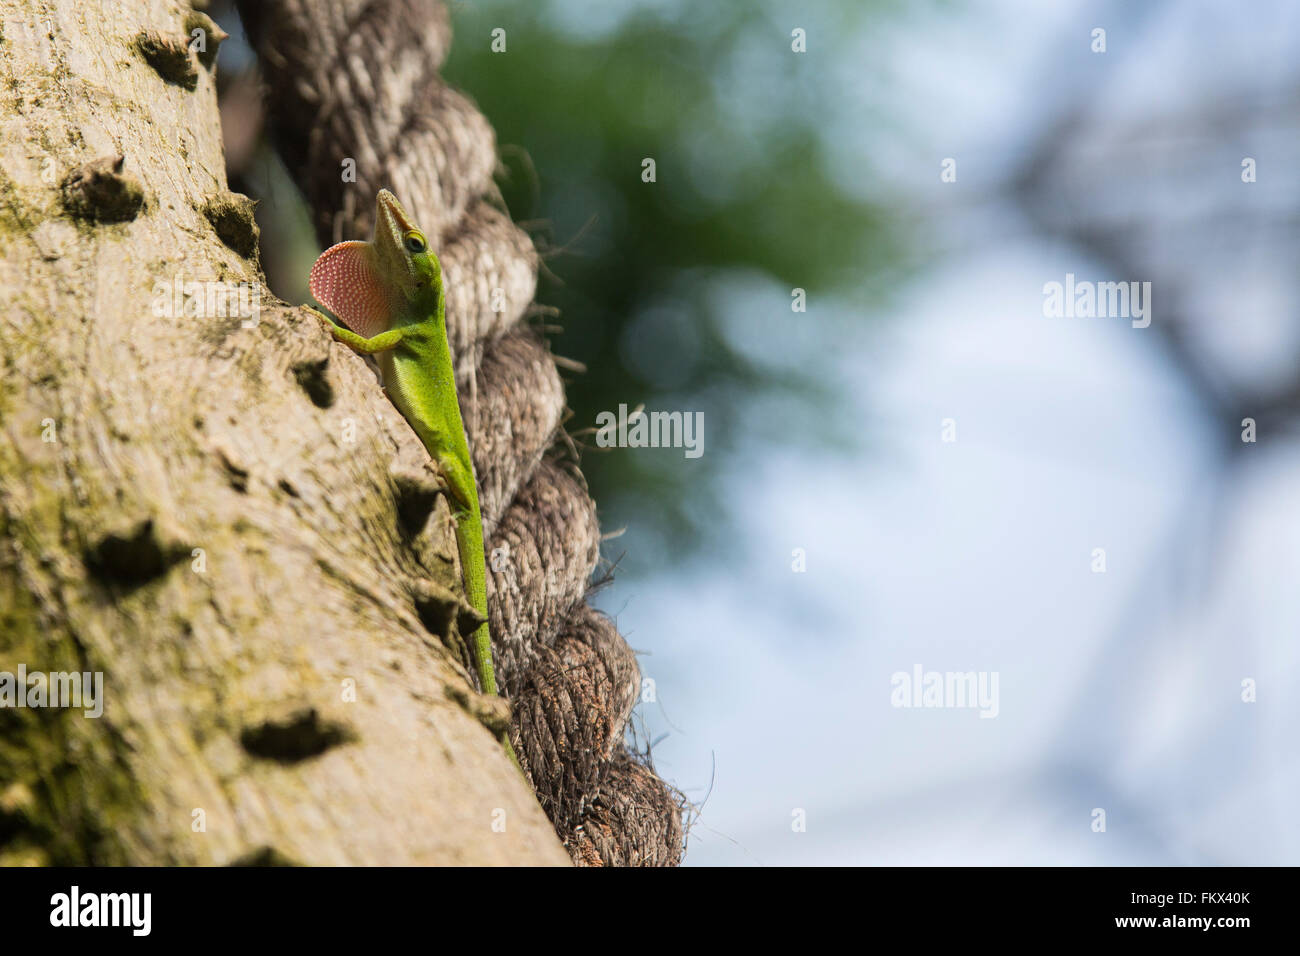 A Green Anole lizard at the Eden Project Stock Photo